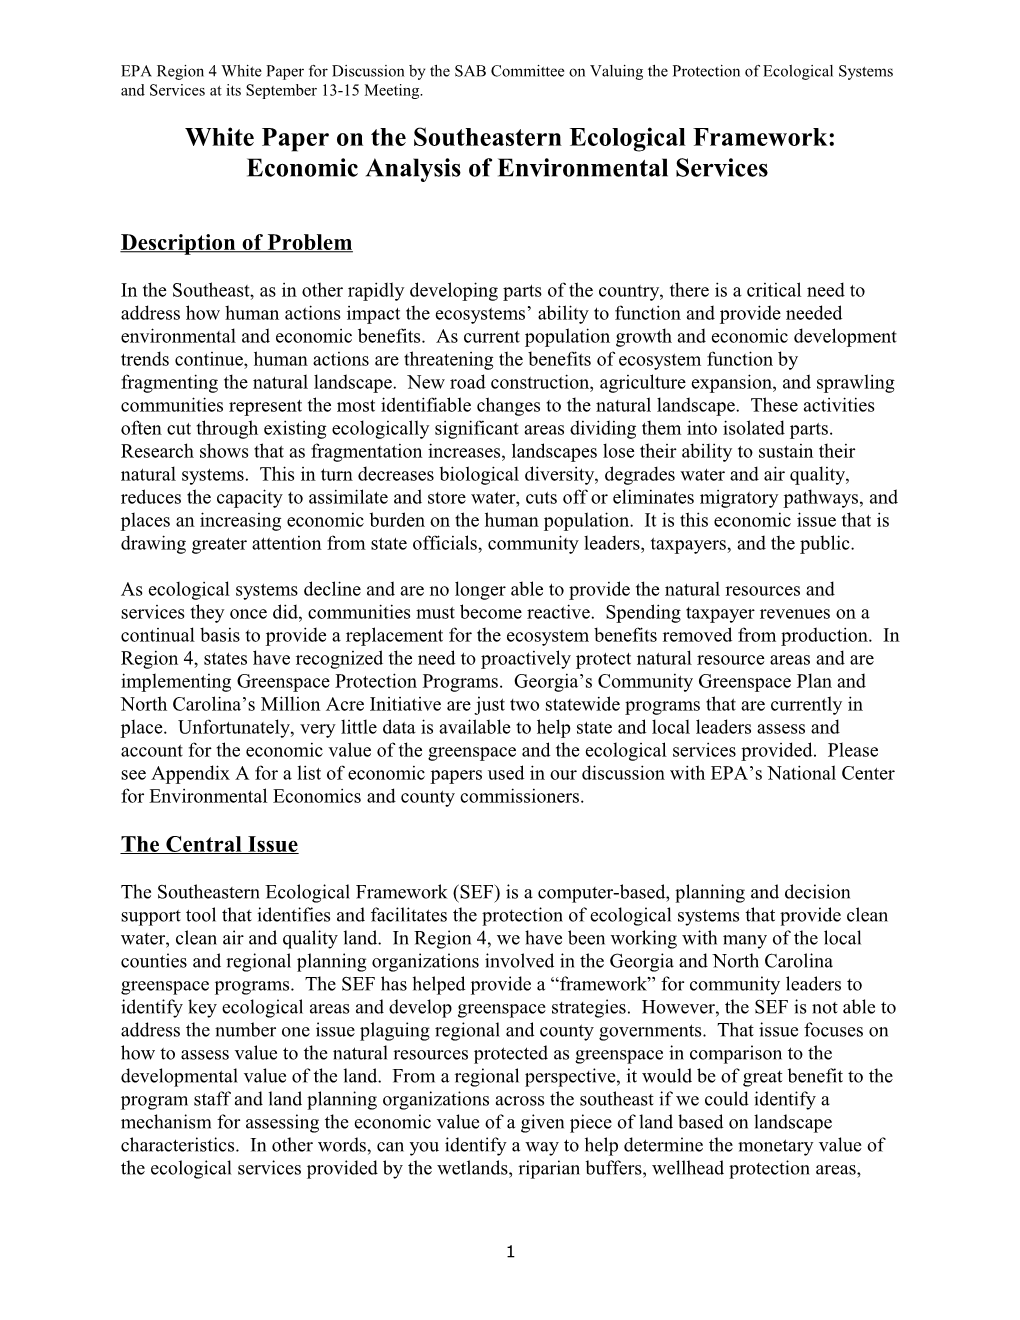 White Paper for One North Carolina Naturally and EPA Southeastern Ecological Framework